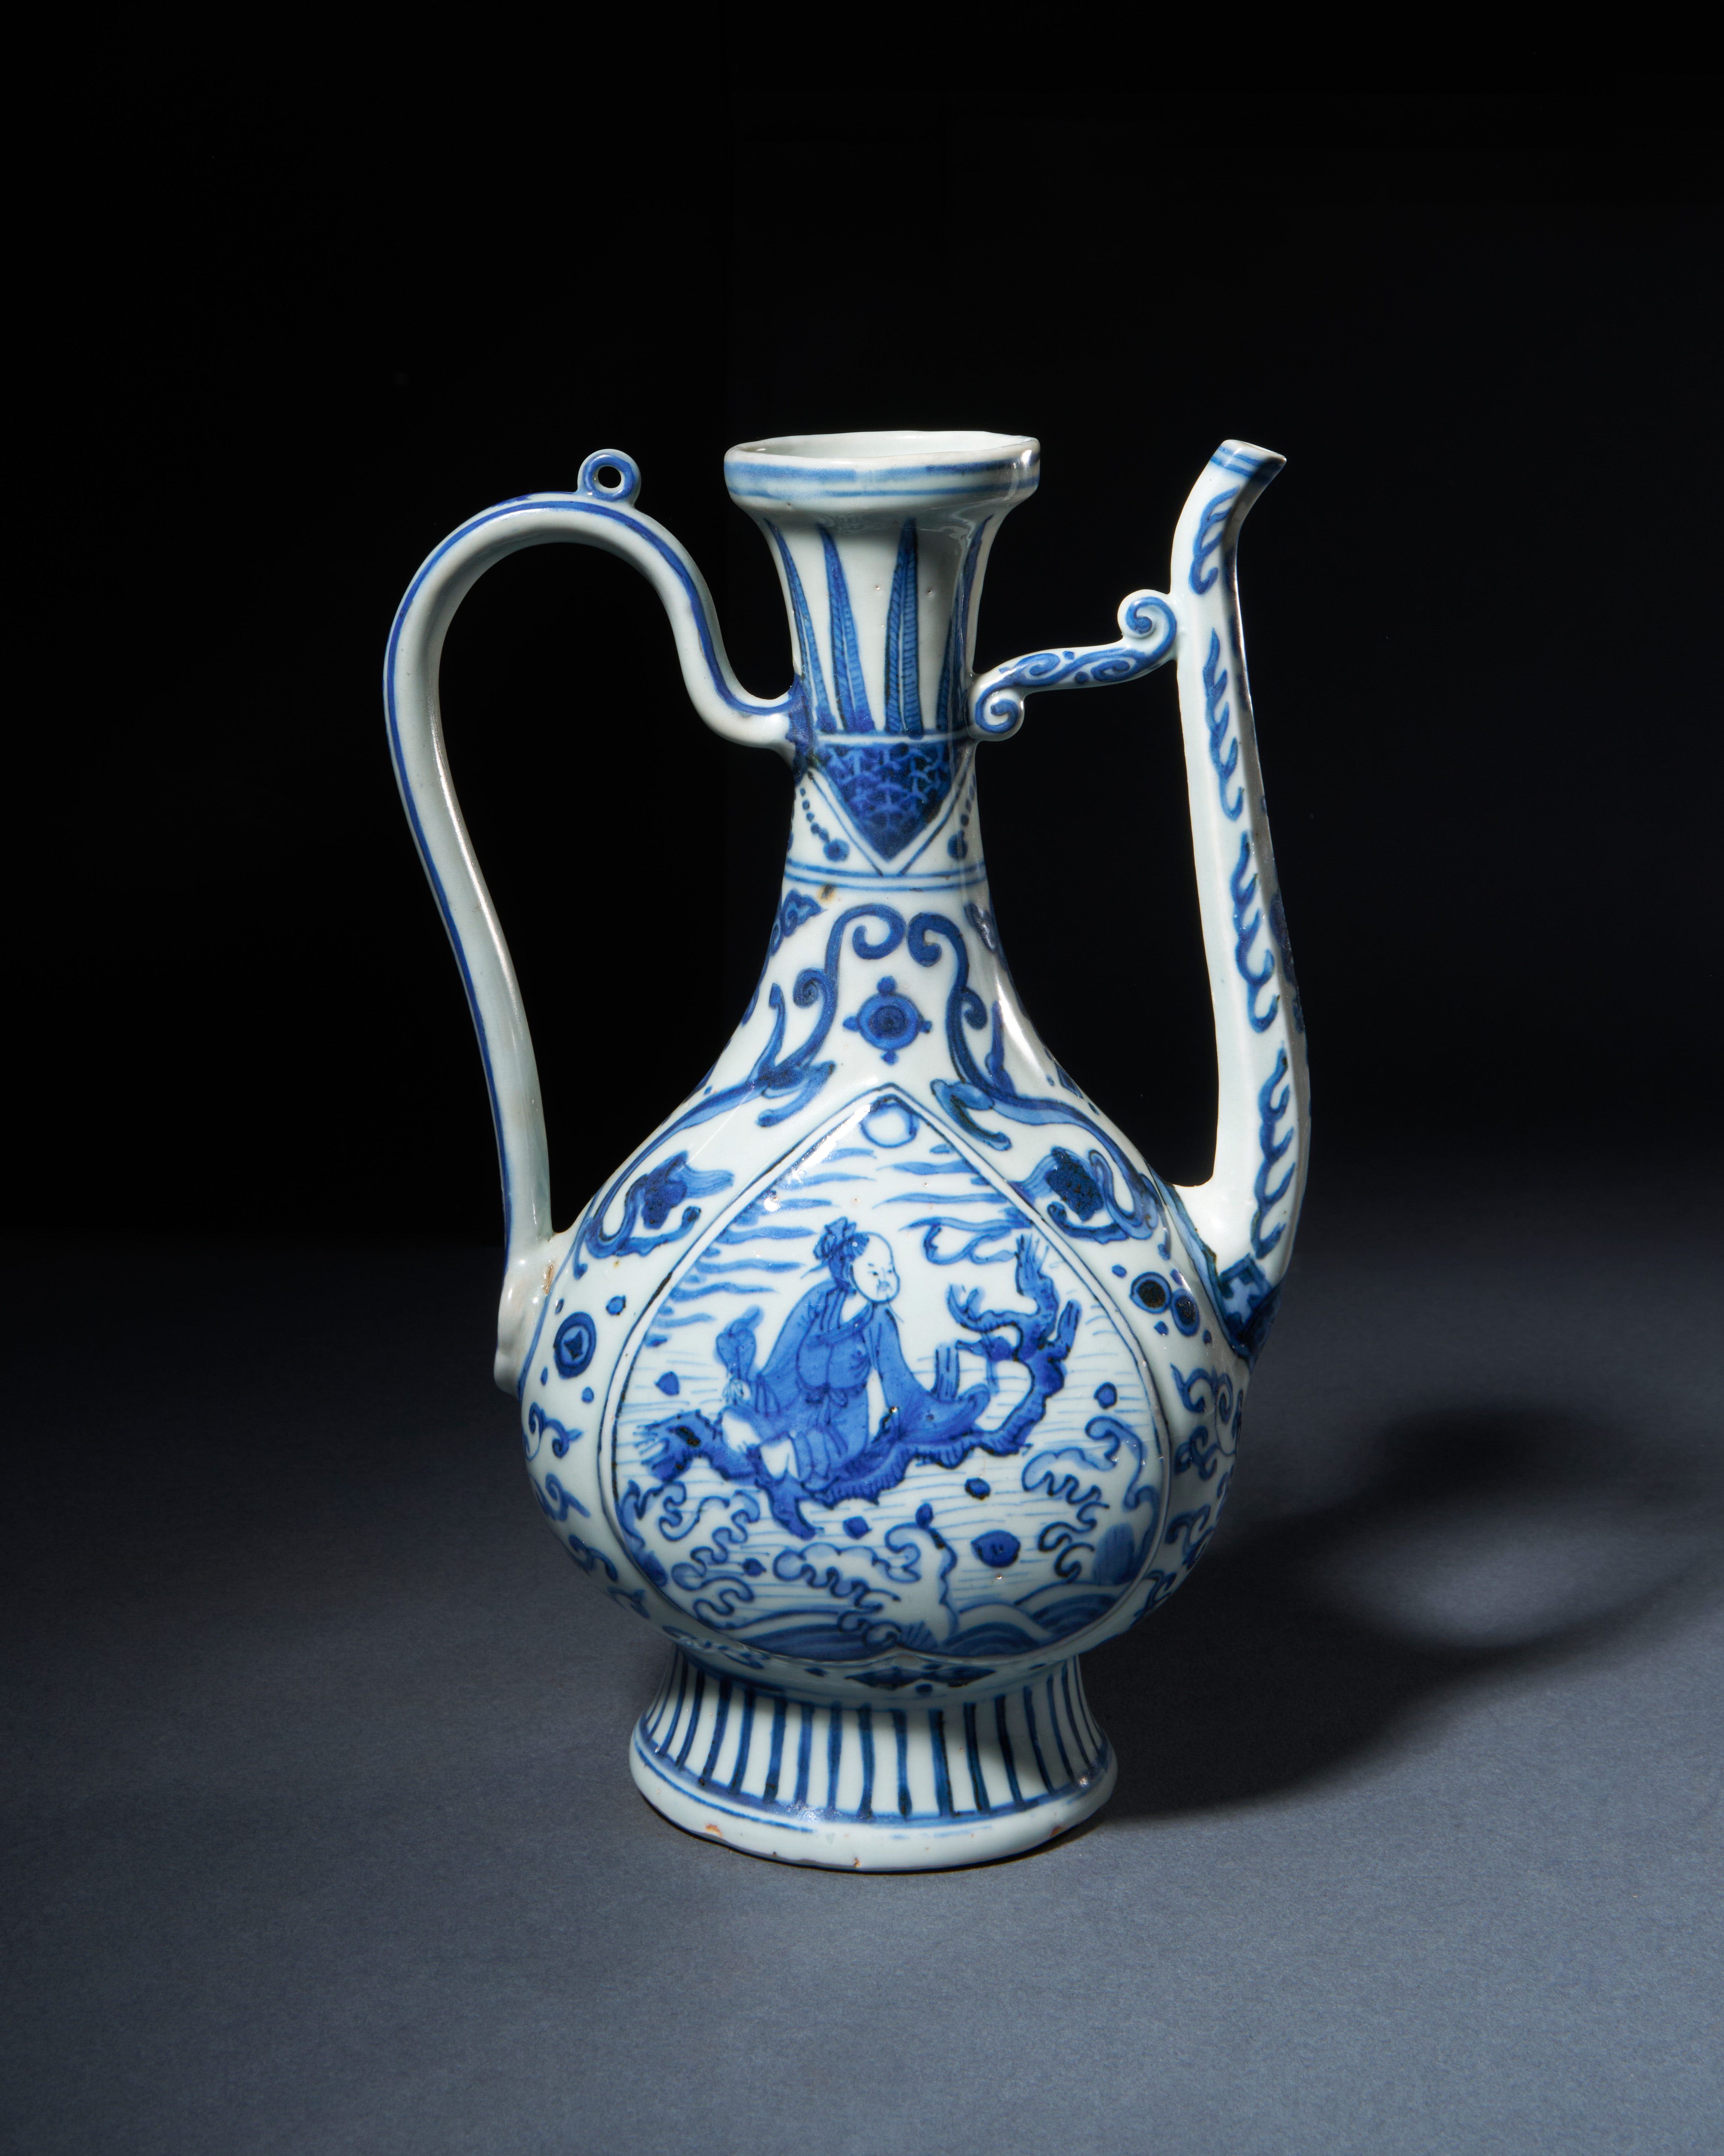 A BLUE AND WHITE PEAR-SHAPED EWER MADE FOR ISLAMIC MARKET, ZHENGDE-WANLI PERIOD, 16TH-17TH CENTURY - Image 2 of 4